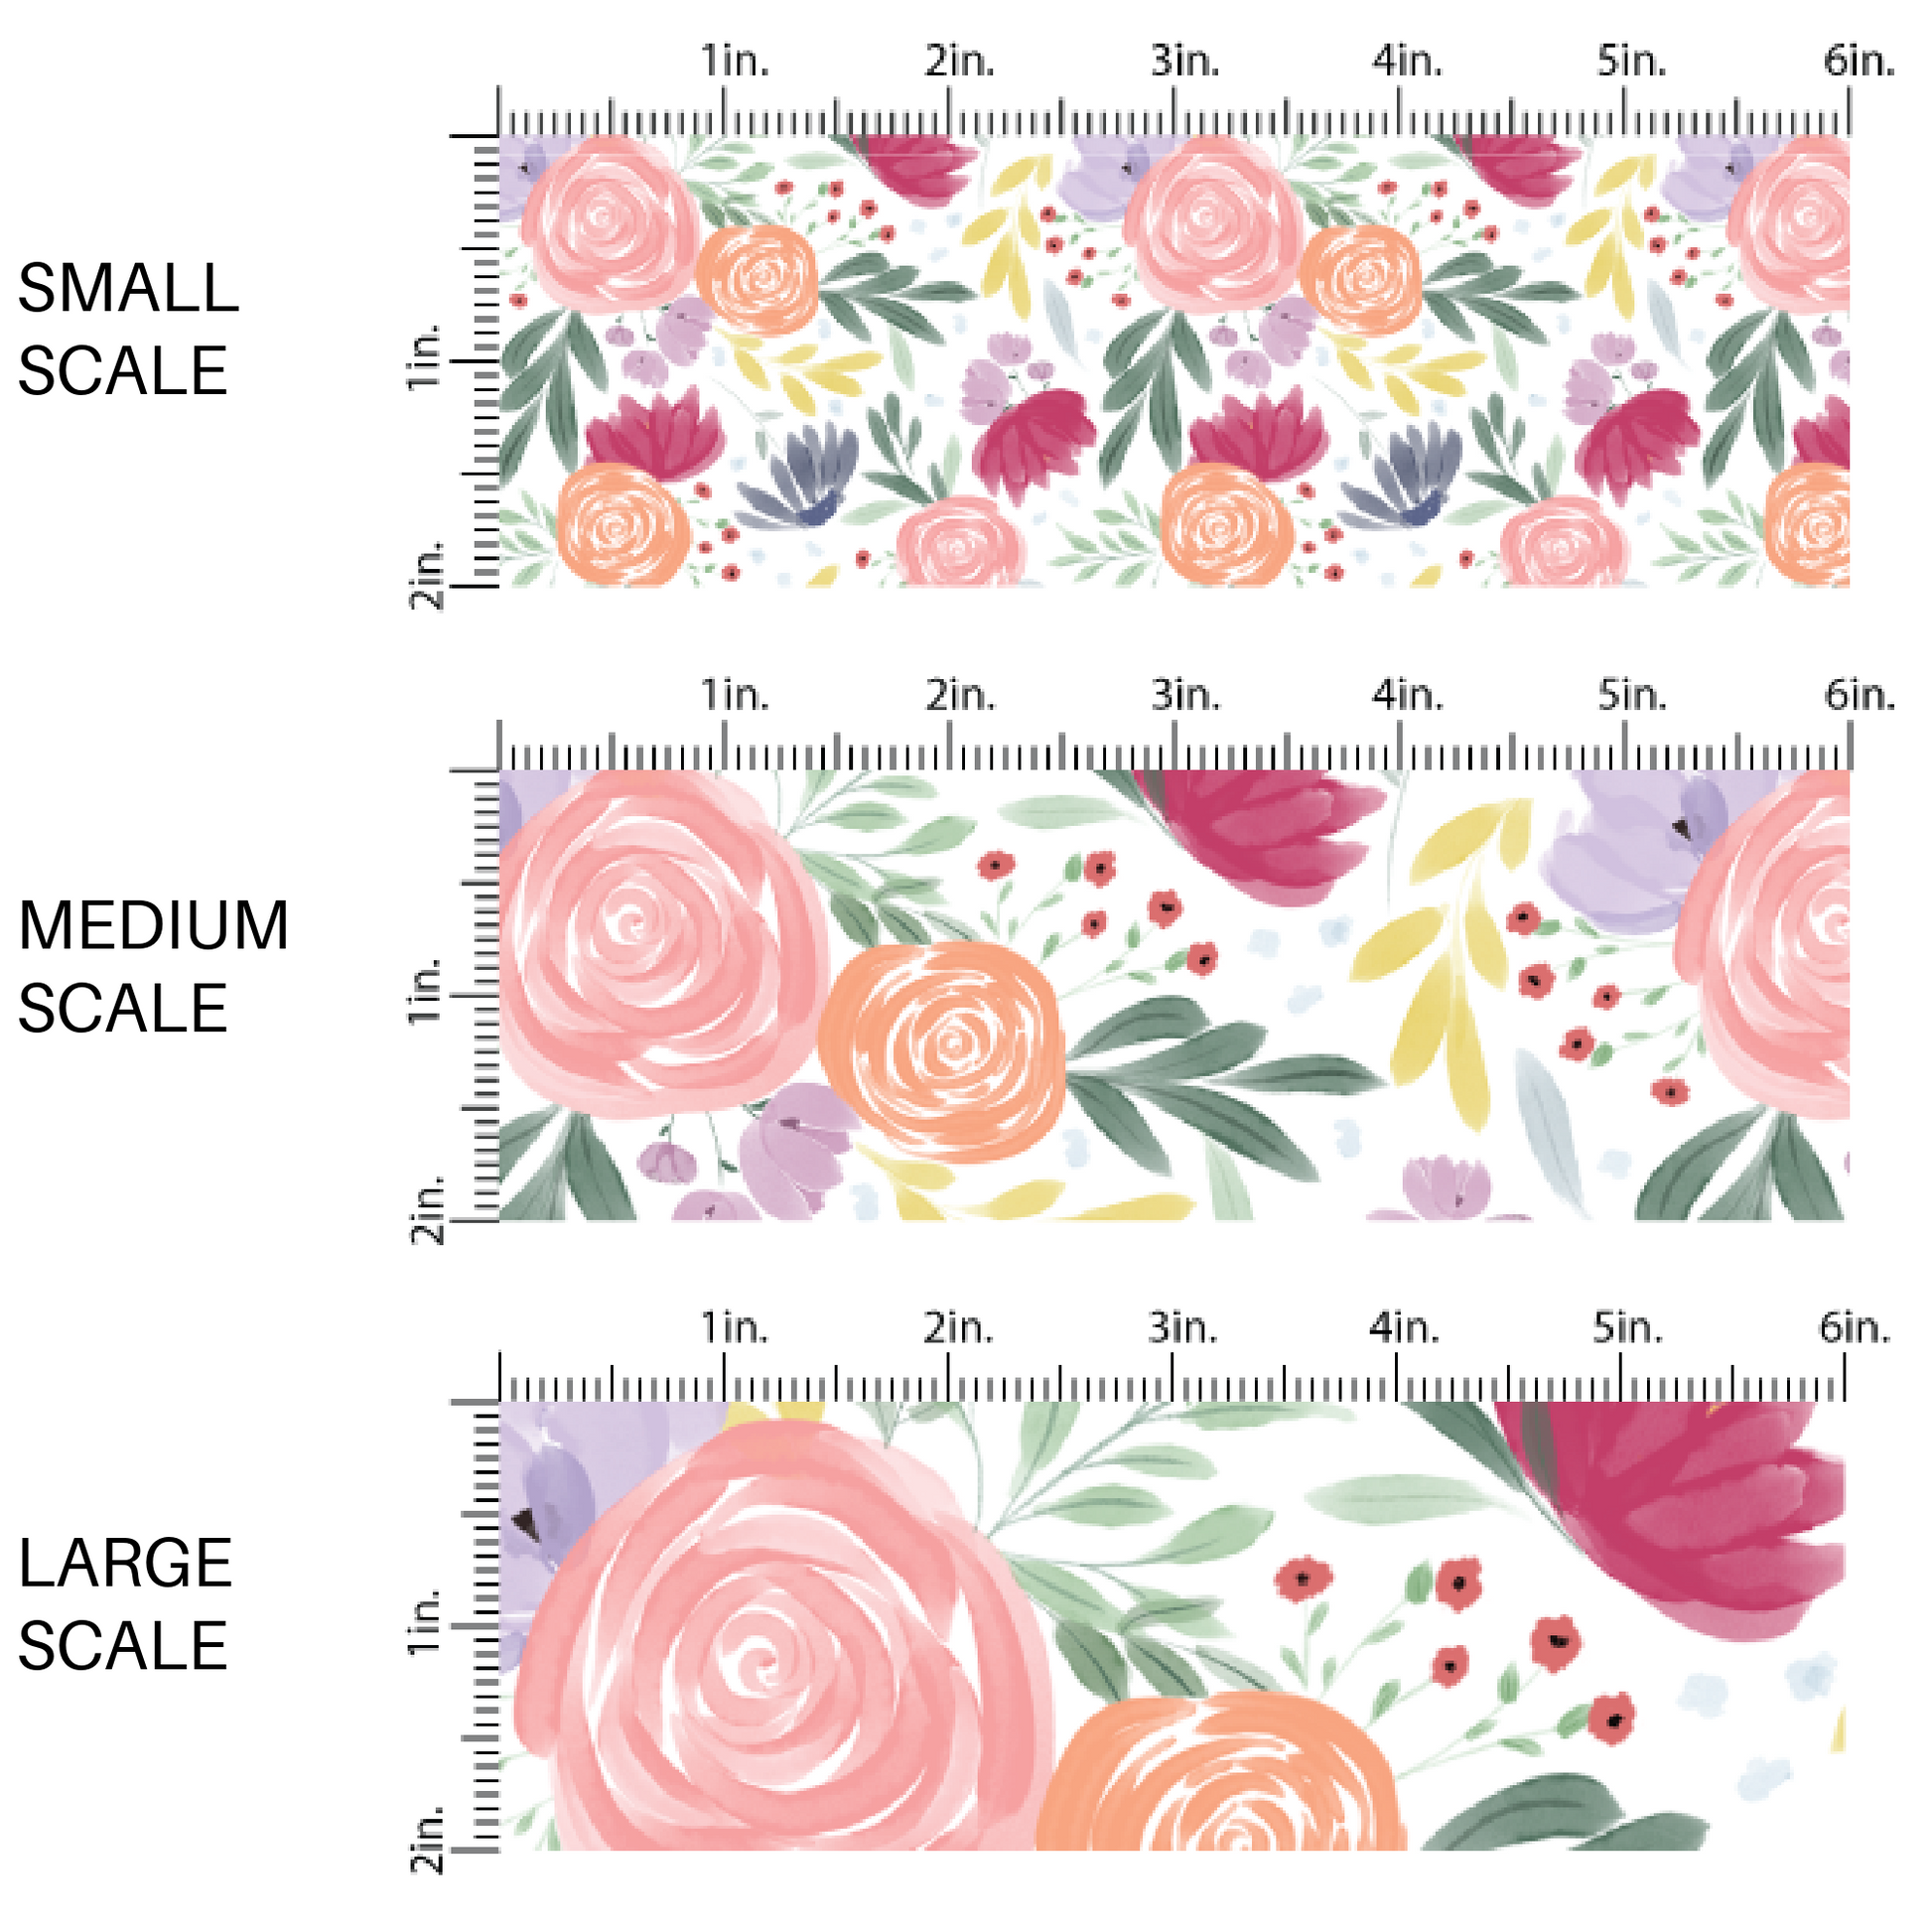 Orange, Yellow, Pink, White, and Blue Springtime Florals on Off-White Fabric by the Yard scaled image guide.